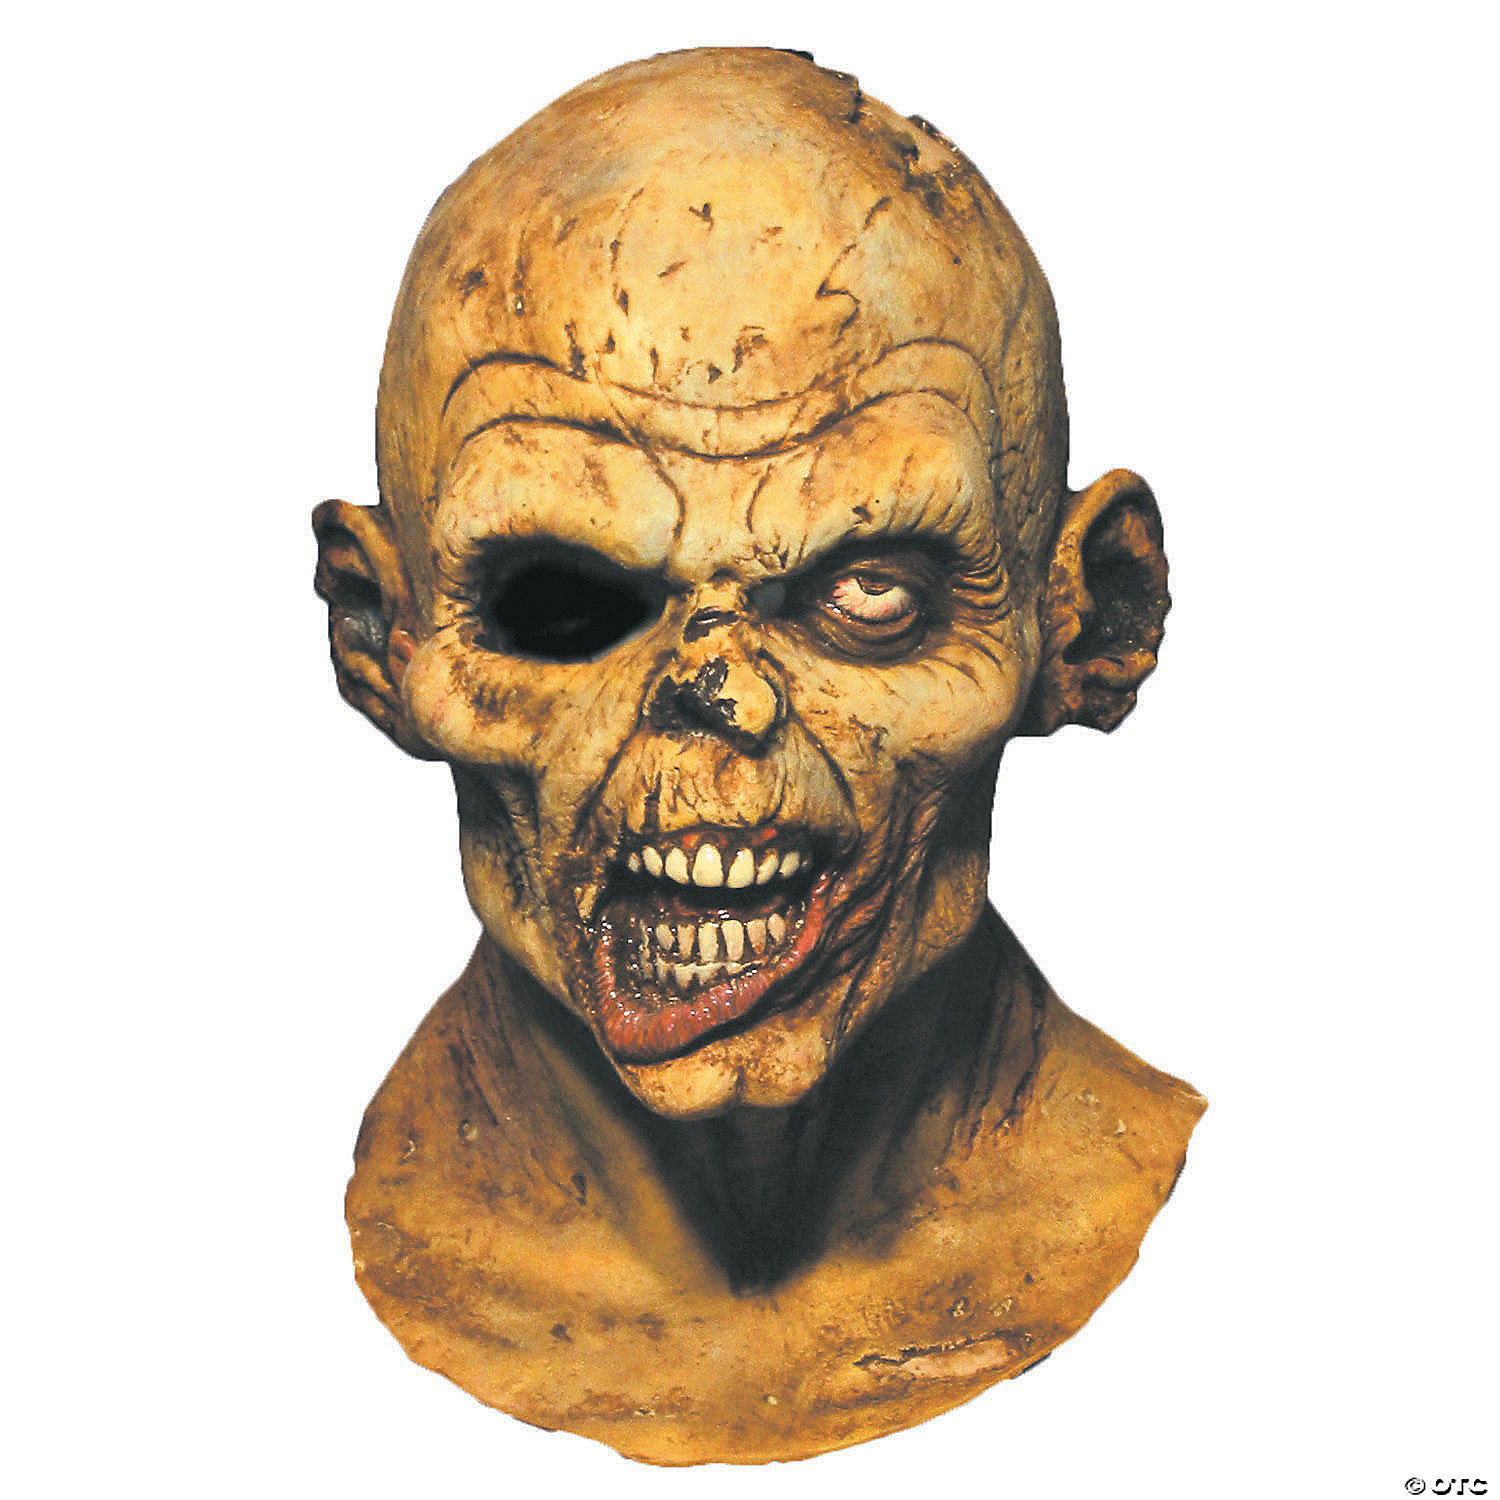 GATES OF HELL ZOMBIE MASK - HALLOWEEN